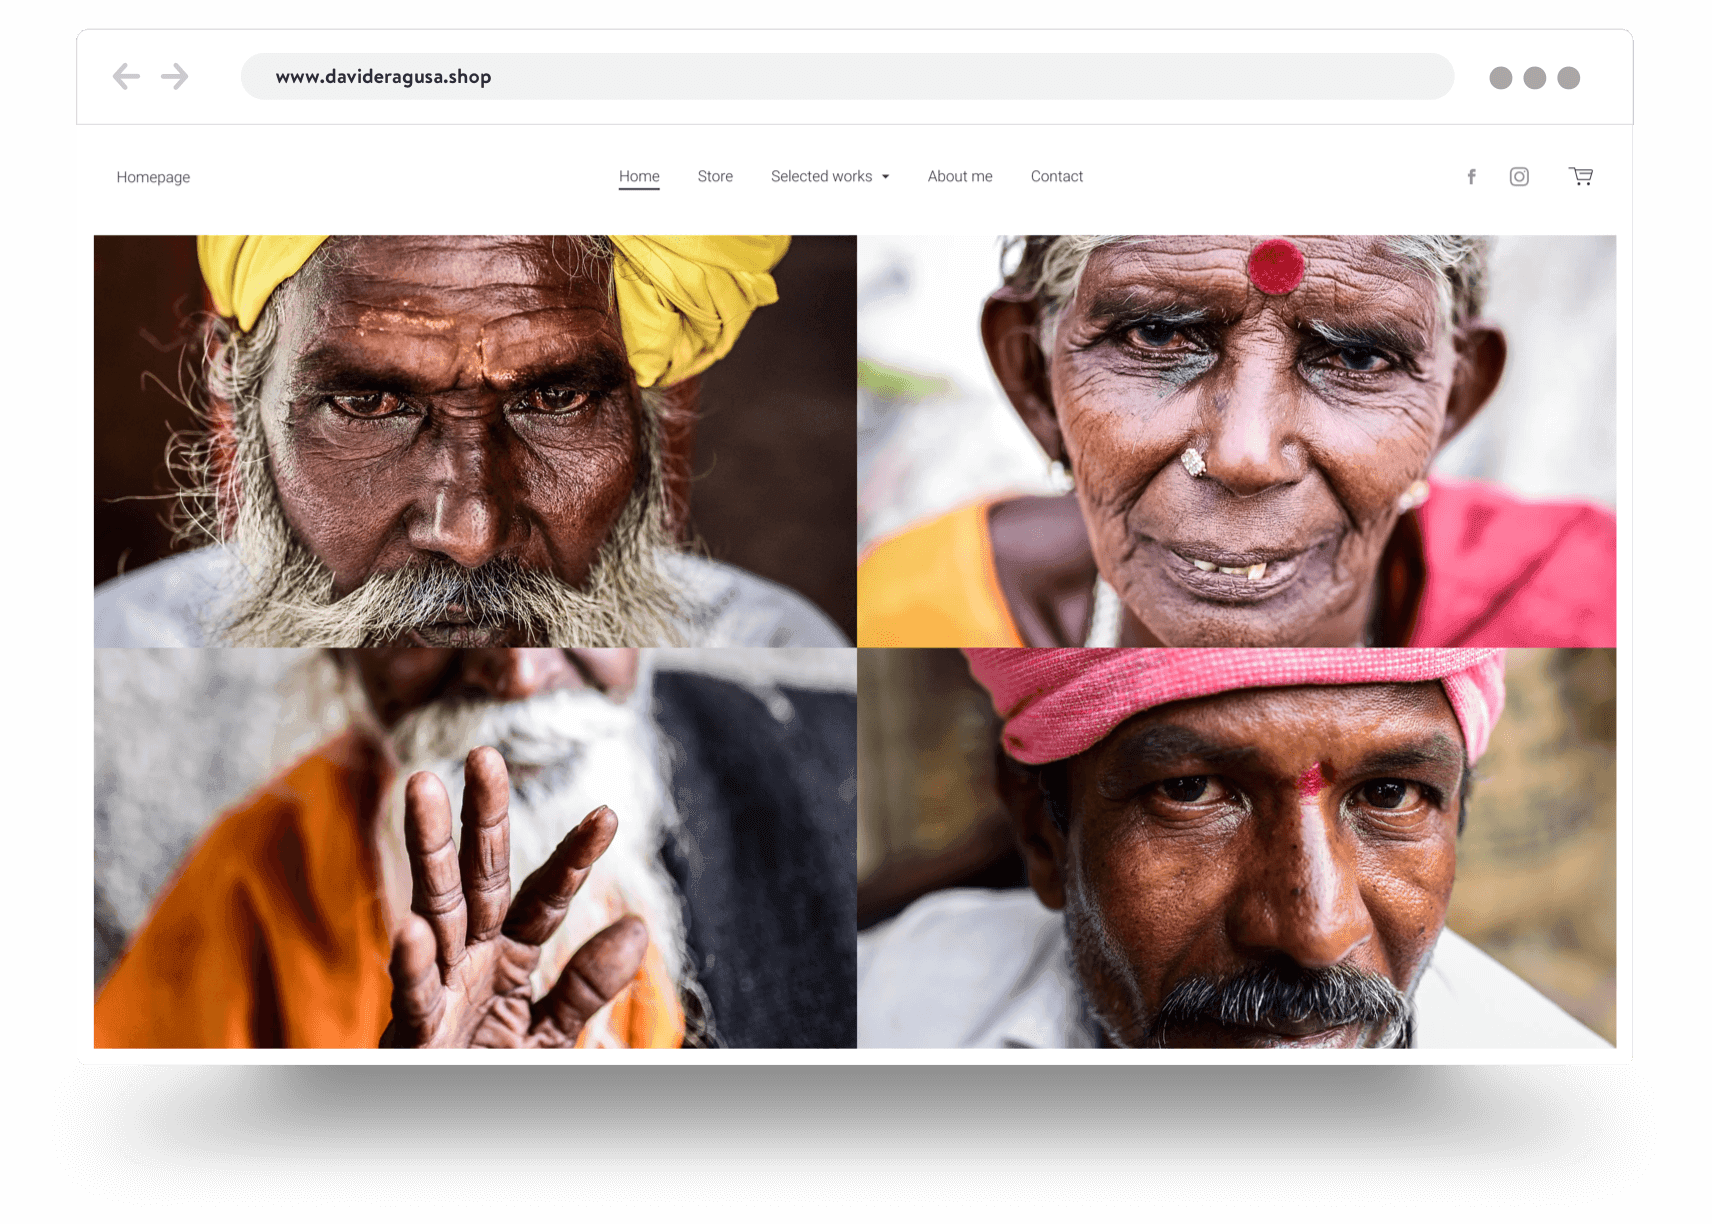 Example of a photography portfolio website build with Jimdo